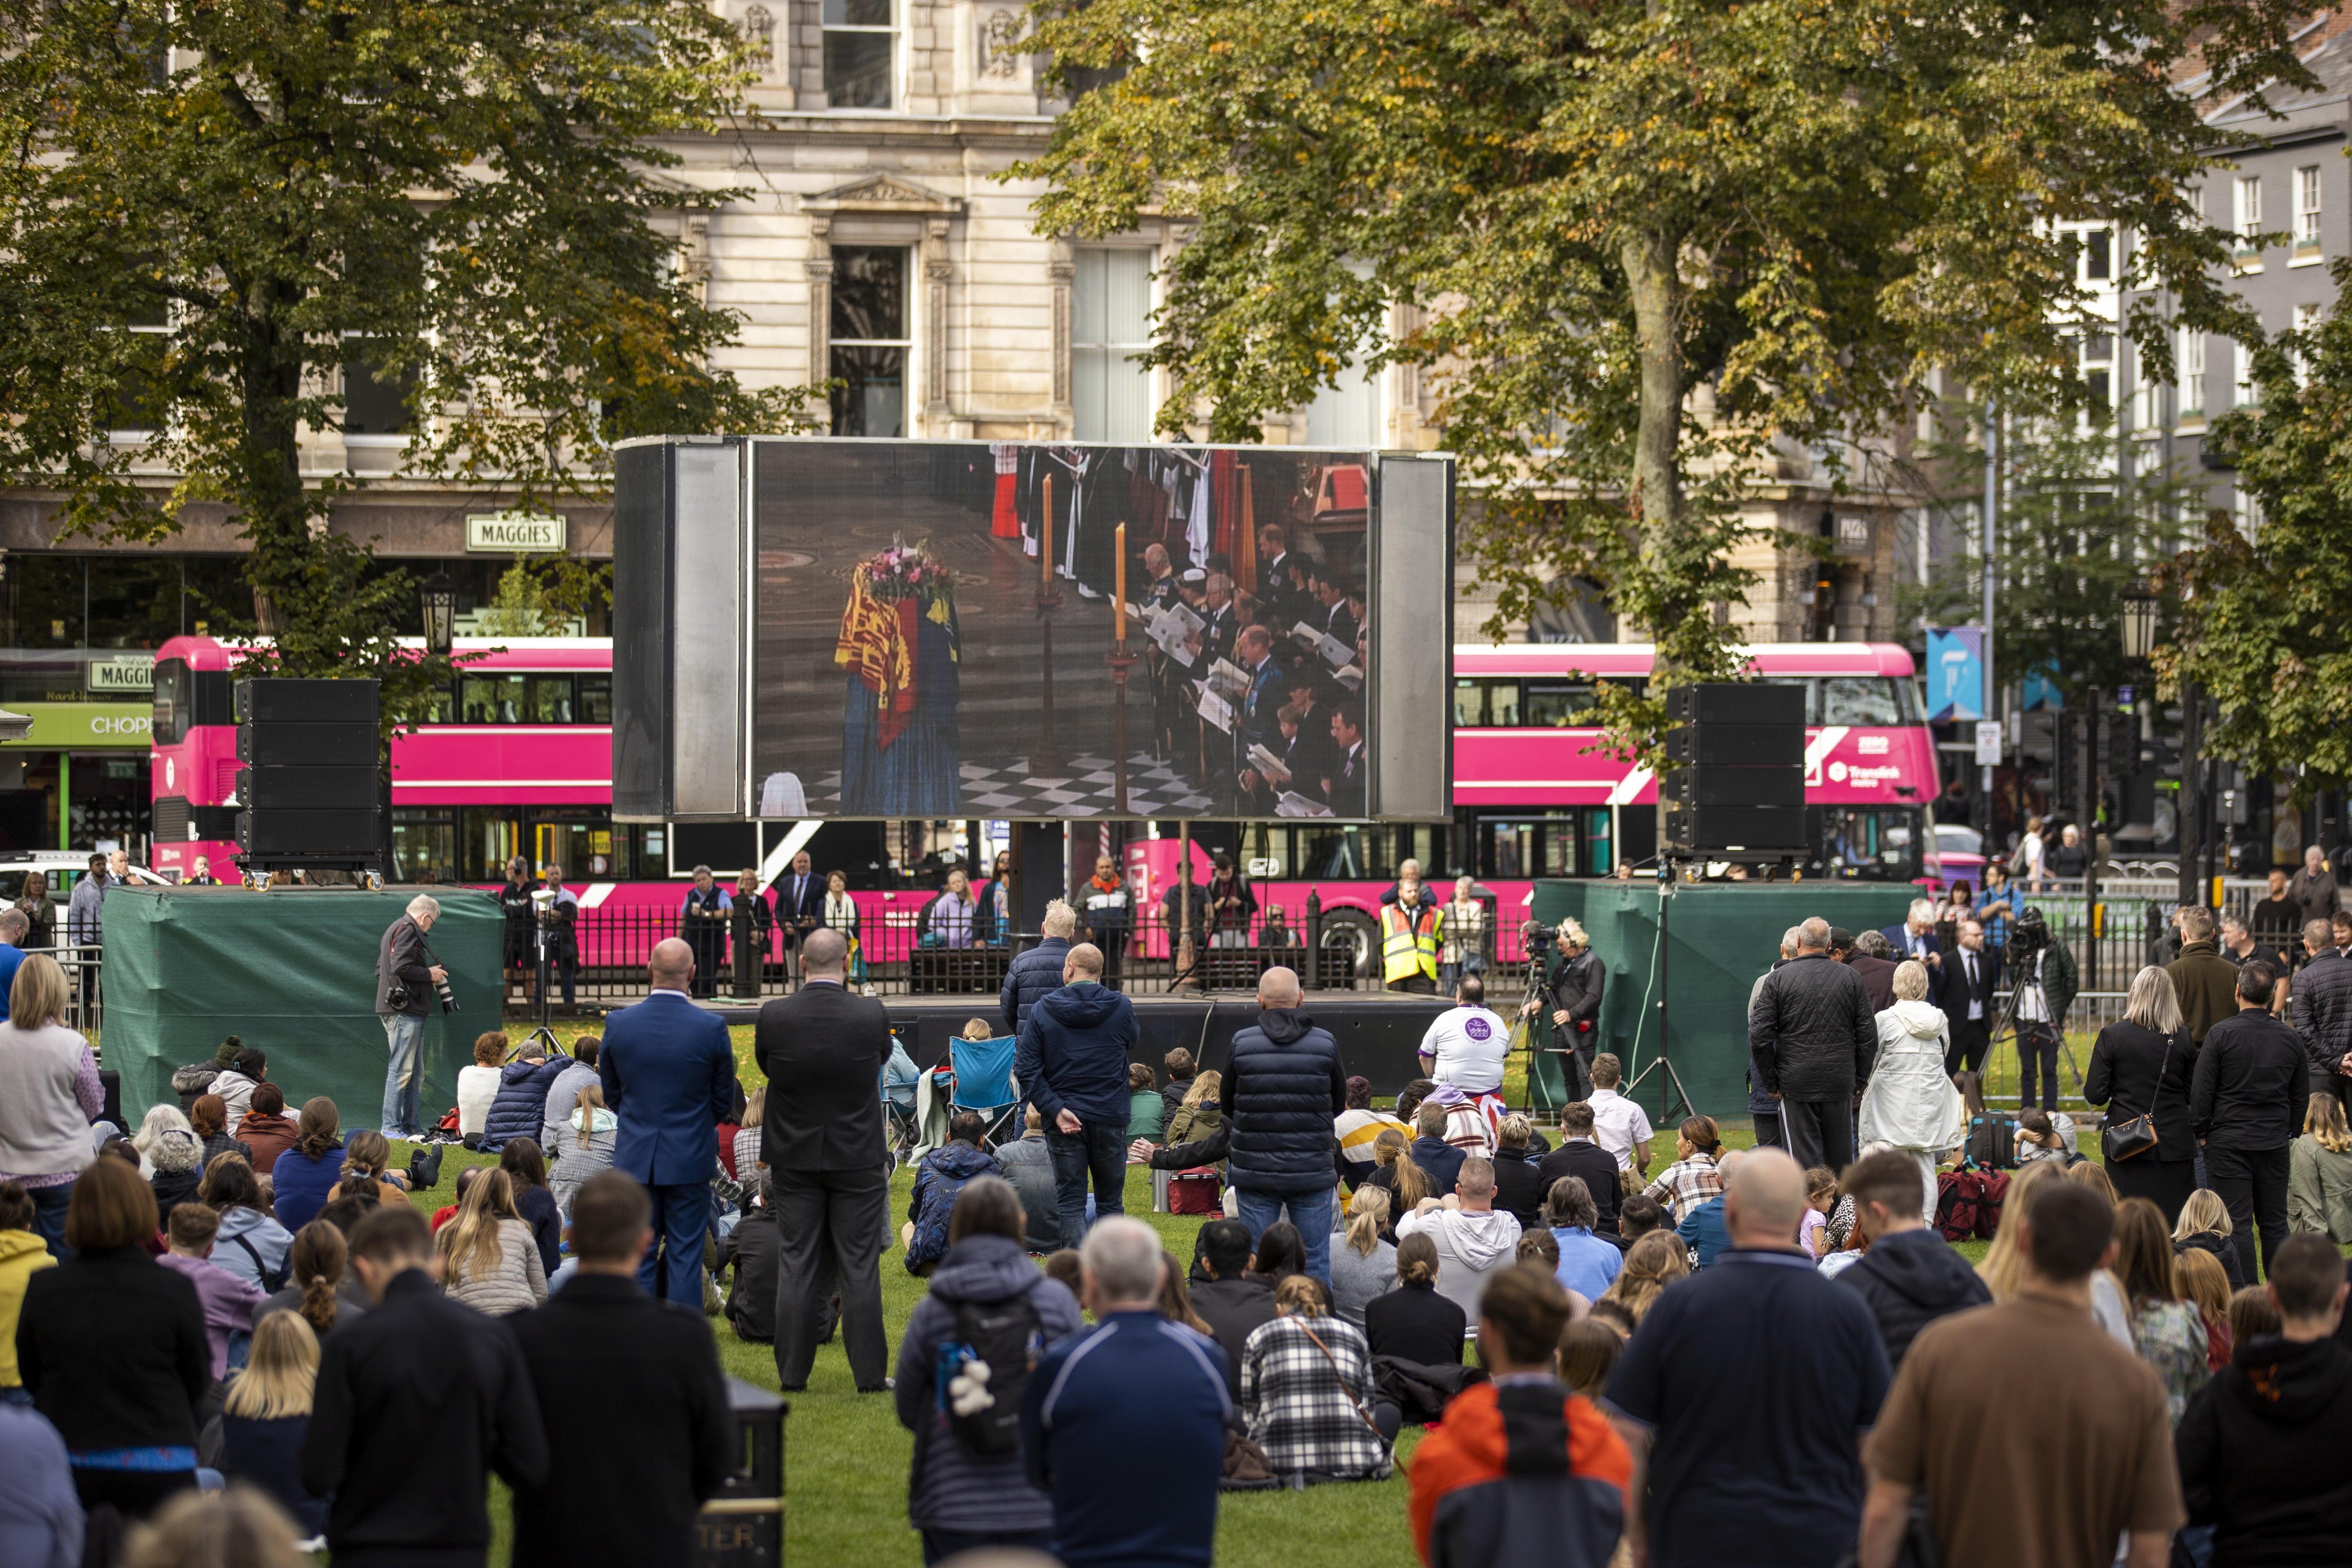 People in the grounds of Belfast City Hall watch Queen Elizabeth II funeral on a large screen. Picture date: Monday September 19, 2022.